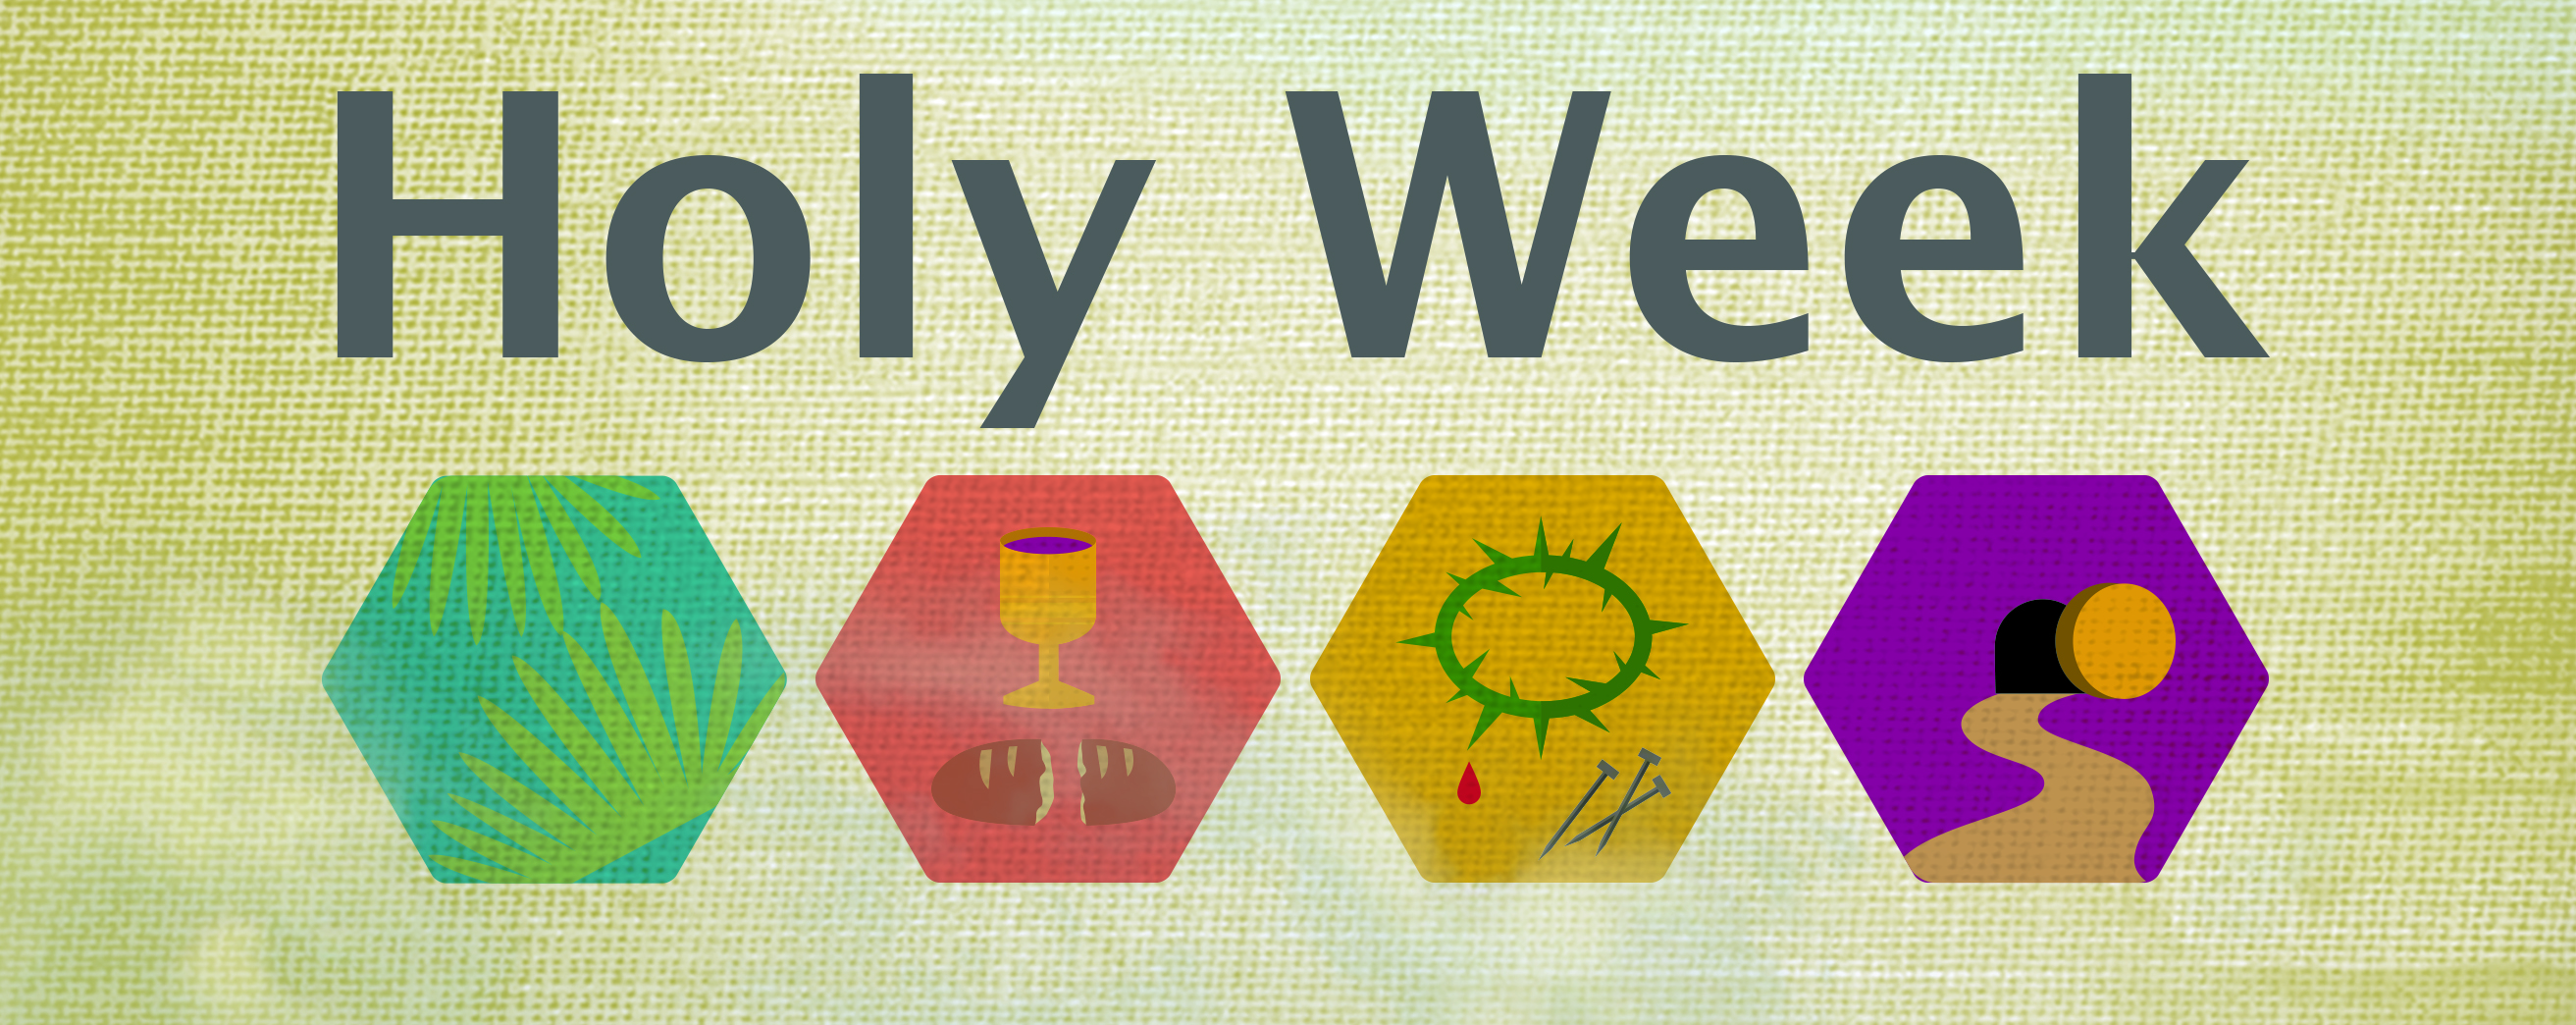 Holy Week Symbols Facebook Cover Picture